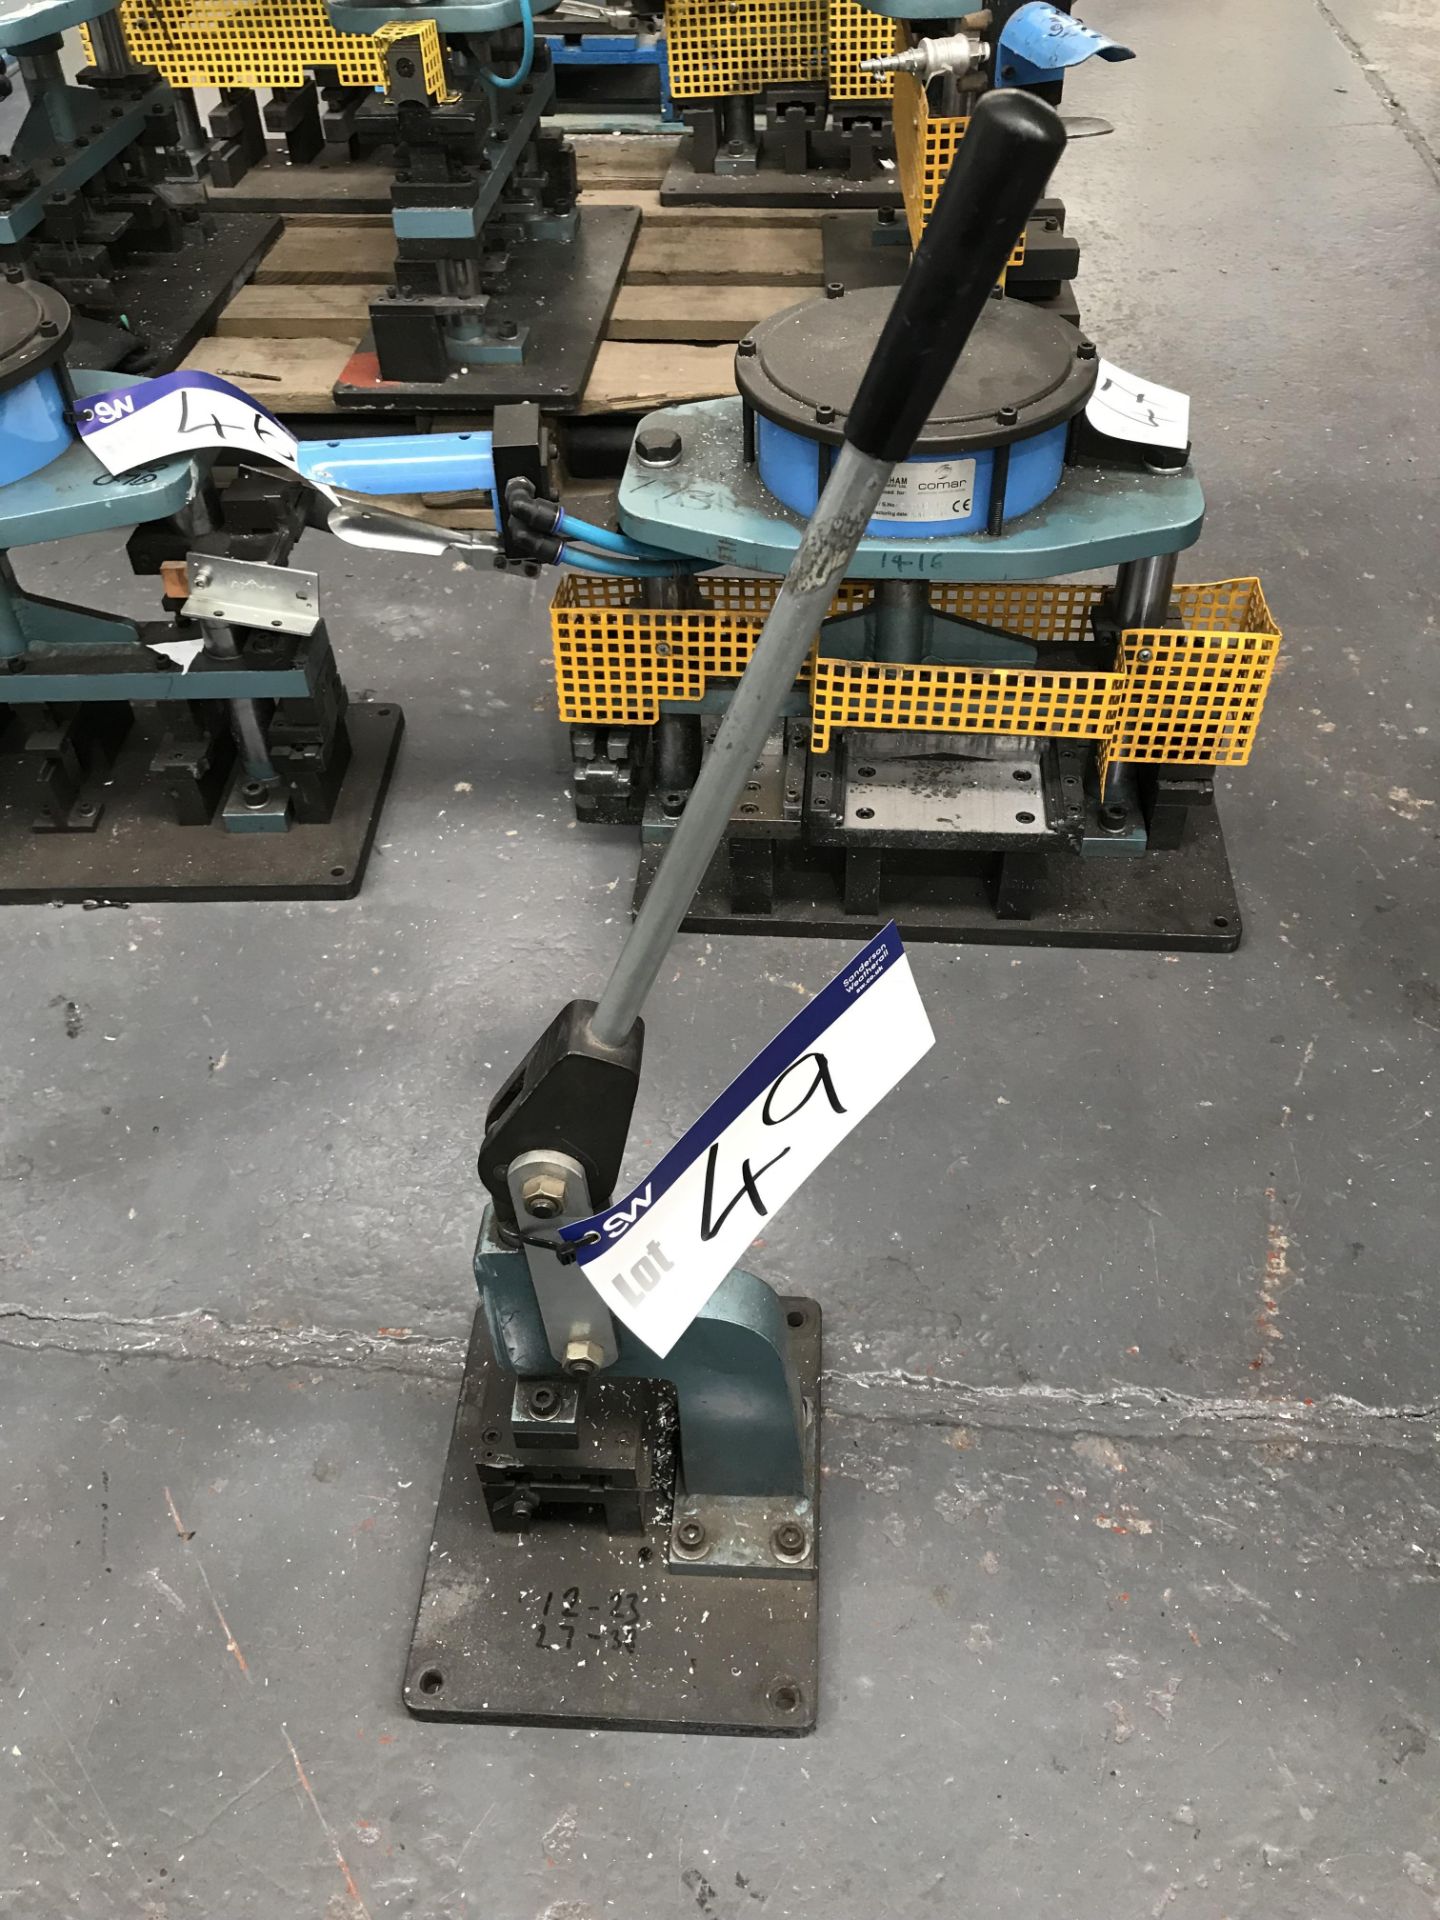 Shoham Manual Punch Tool, Model COM6 Type T3, serial no. 622, year of manufacture 2005Please read